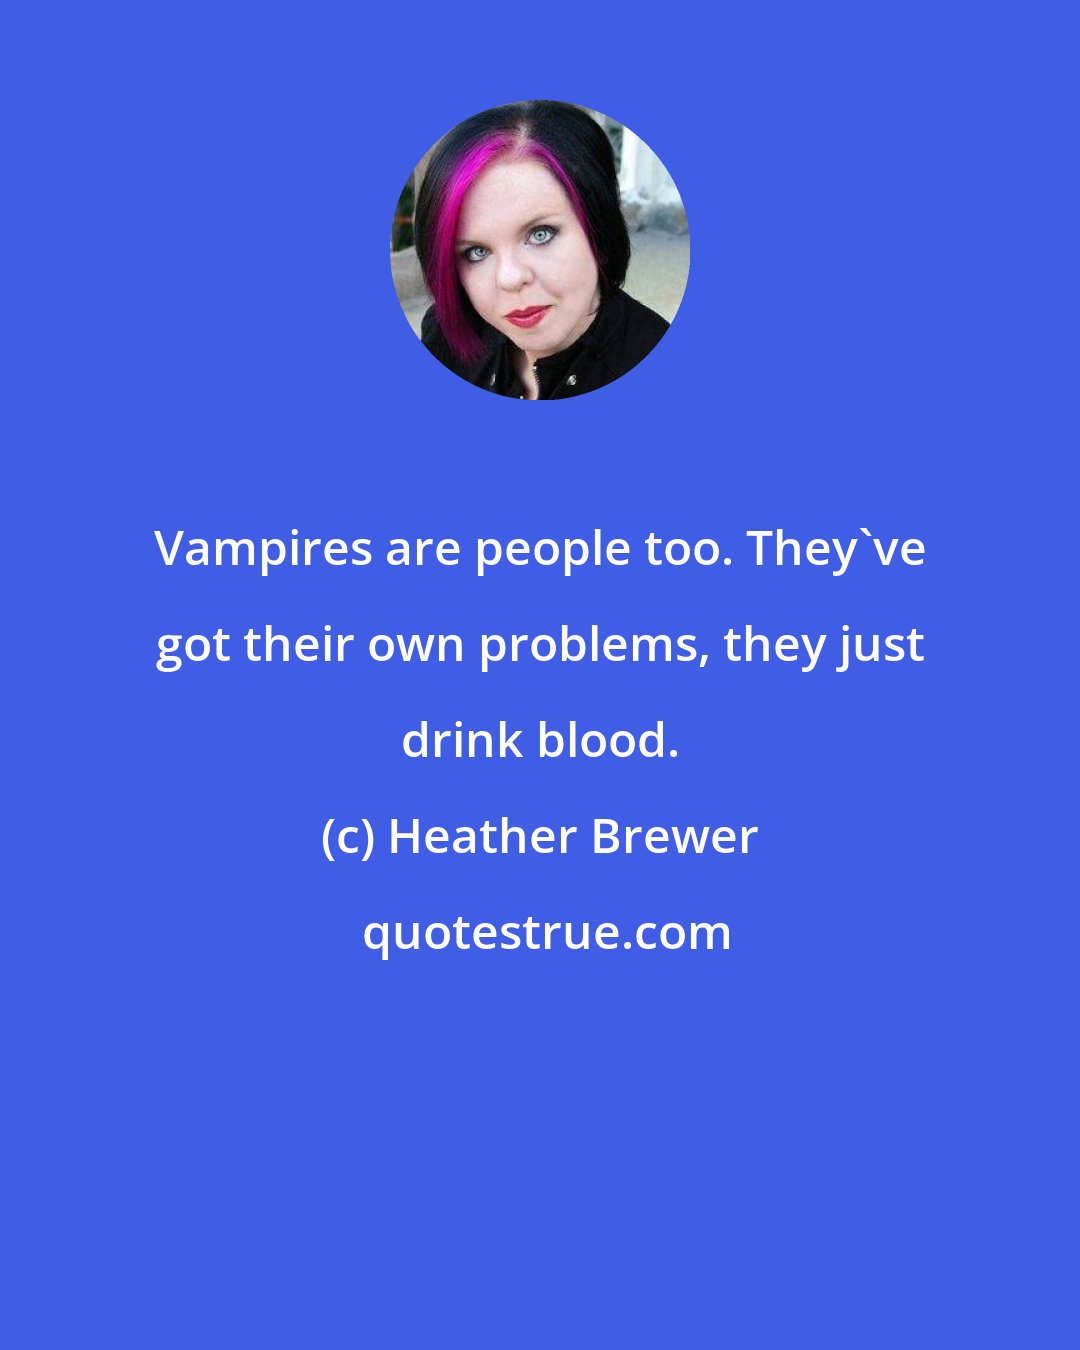 Heather Brewer: Vampires are people too. They've got their own problems, they just drink blood.